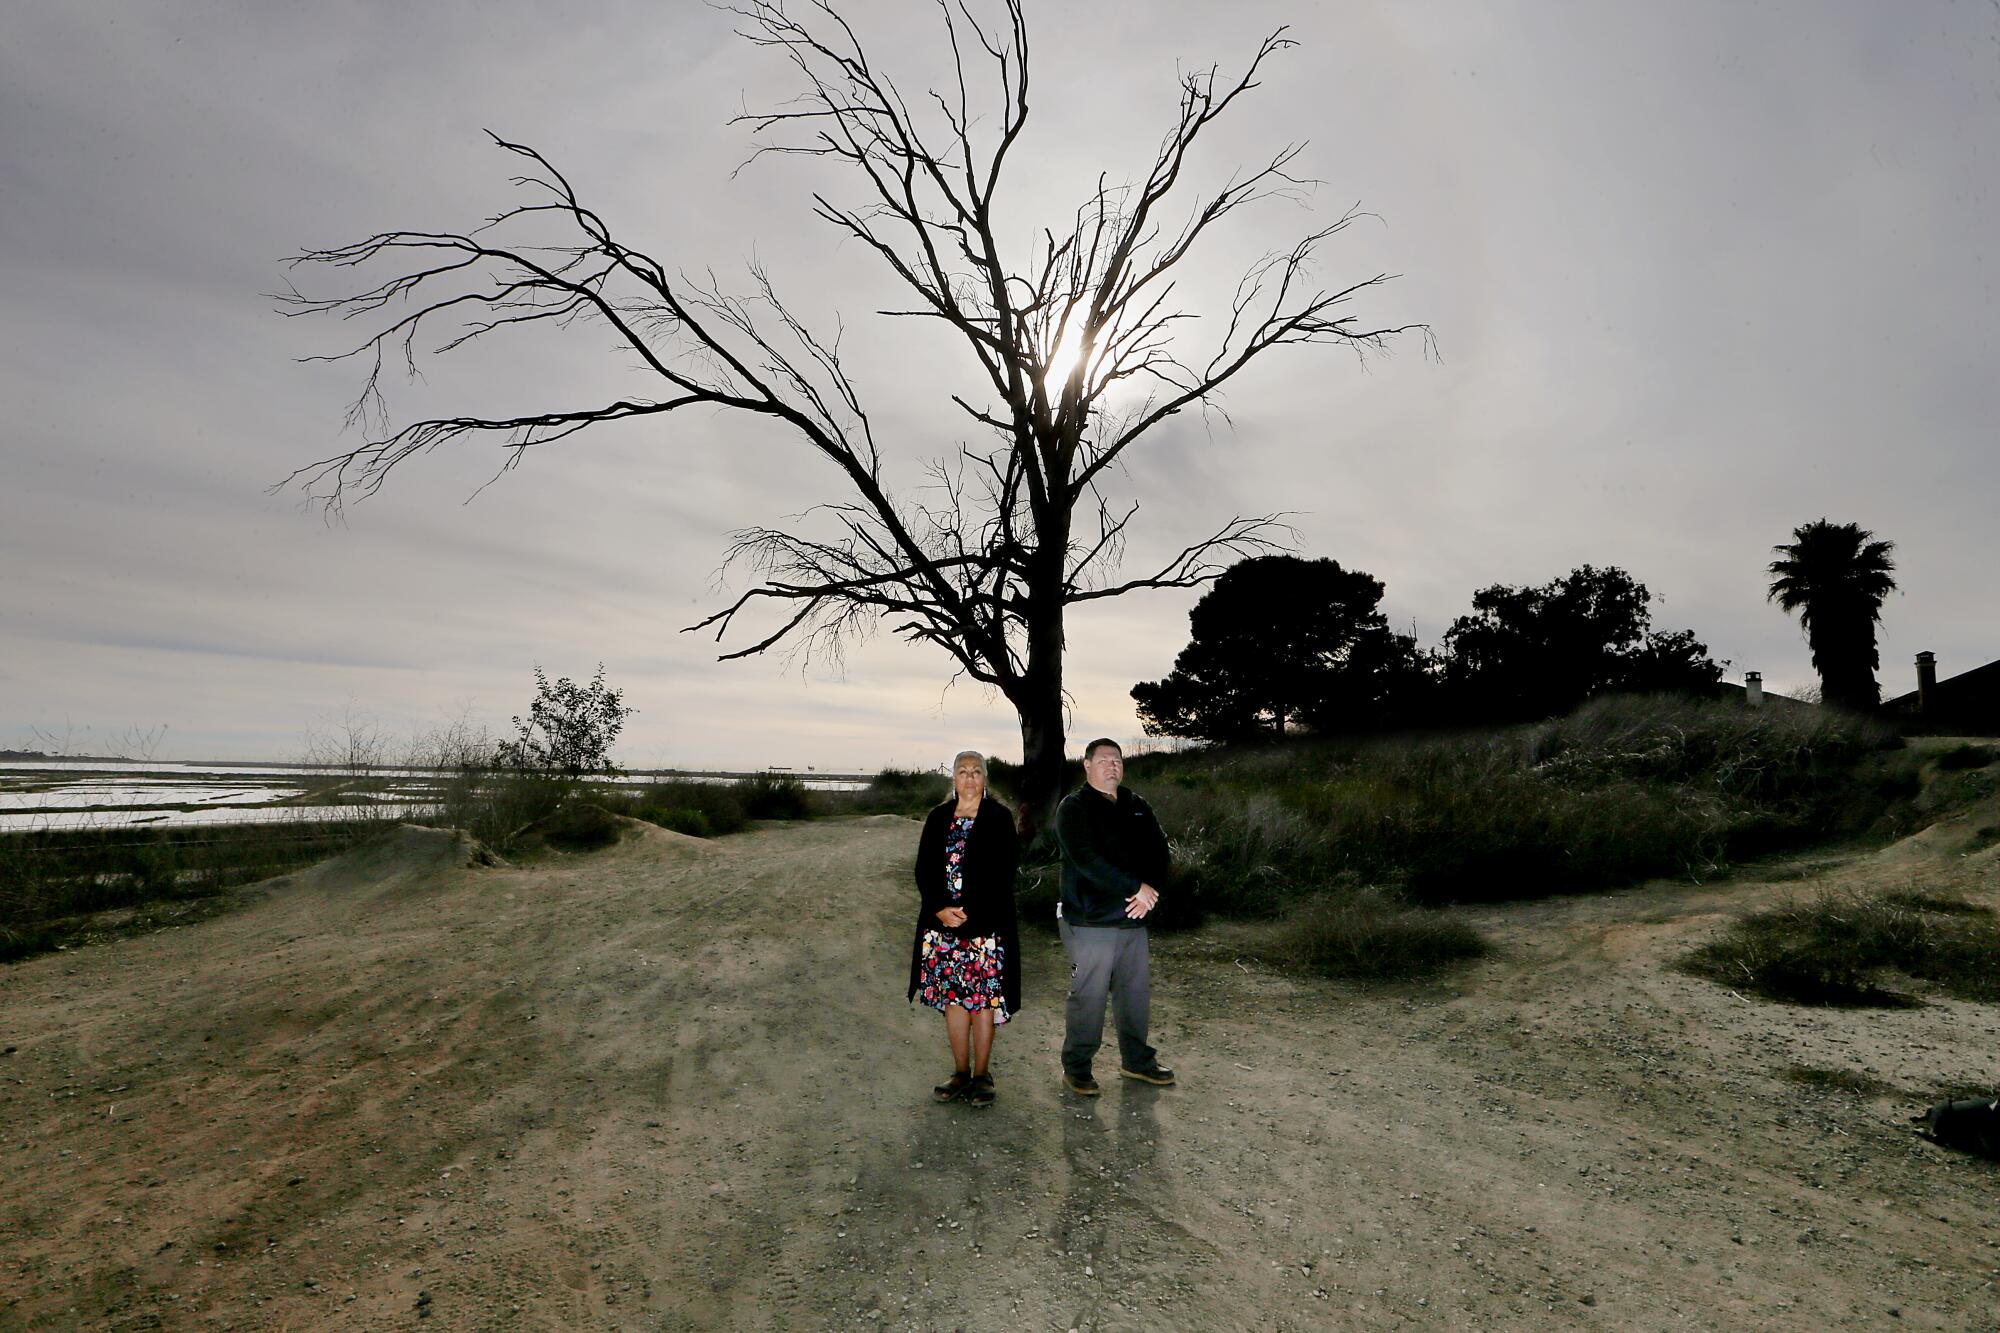 Two people stand near a bare tree at a nature site  